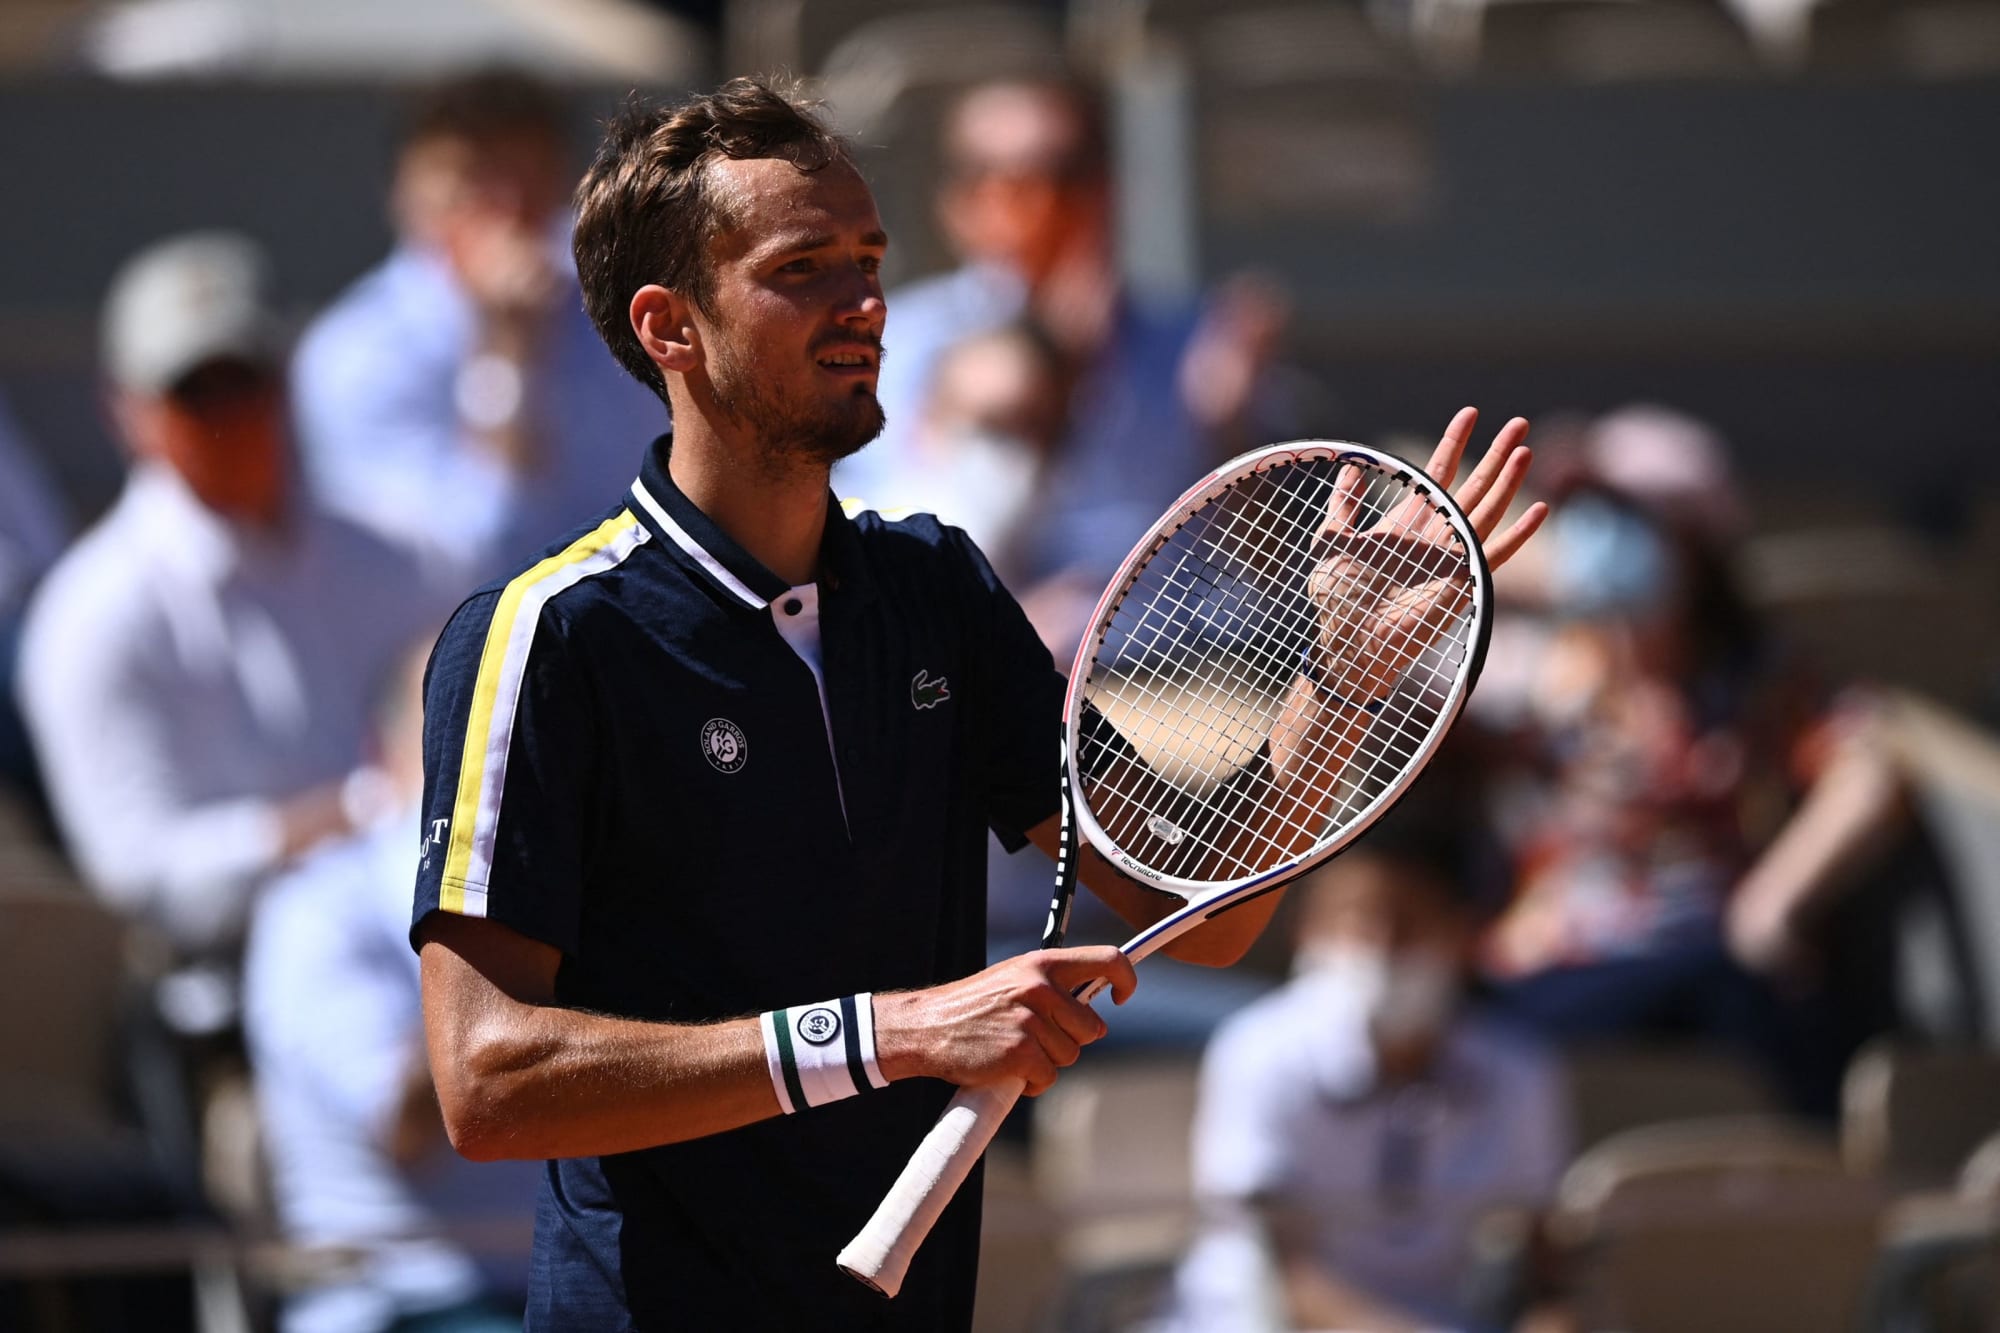 Daniil Medvedev wins first career French Open match